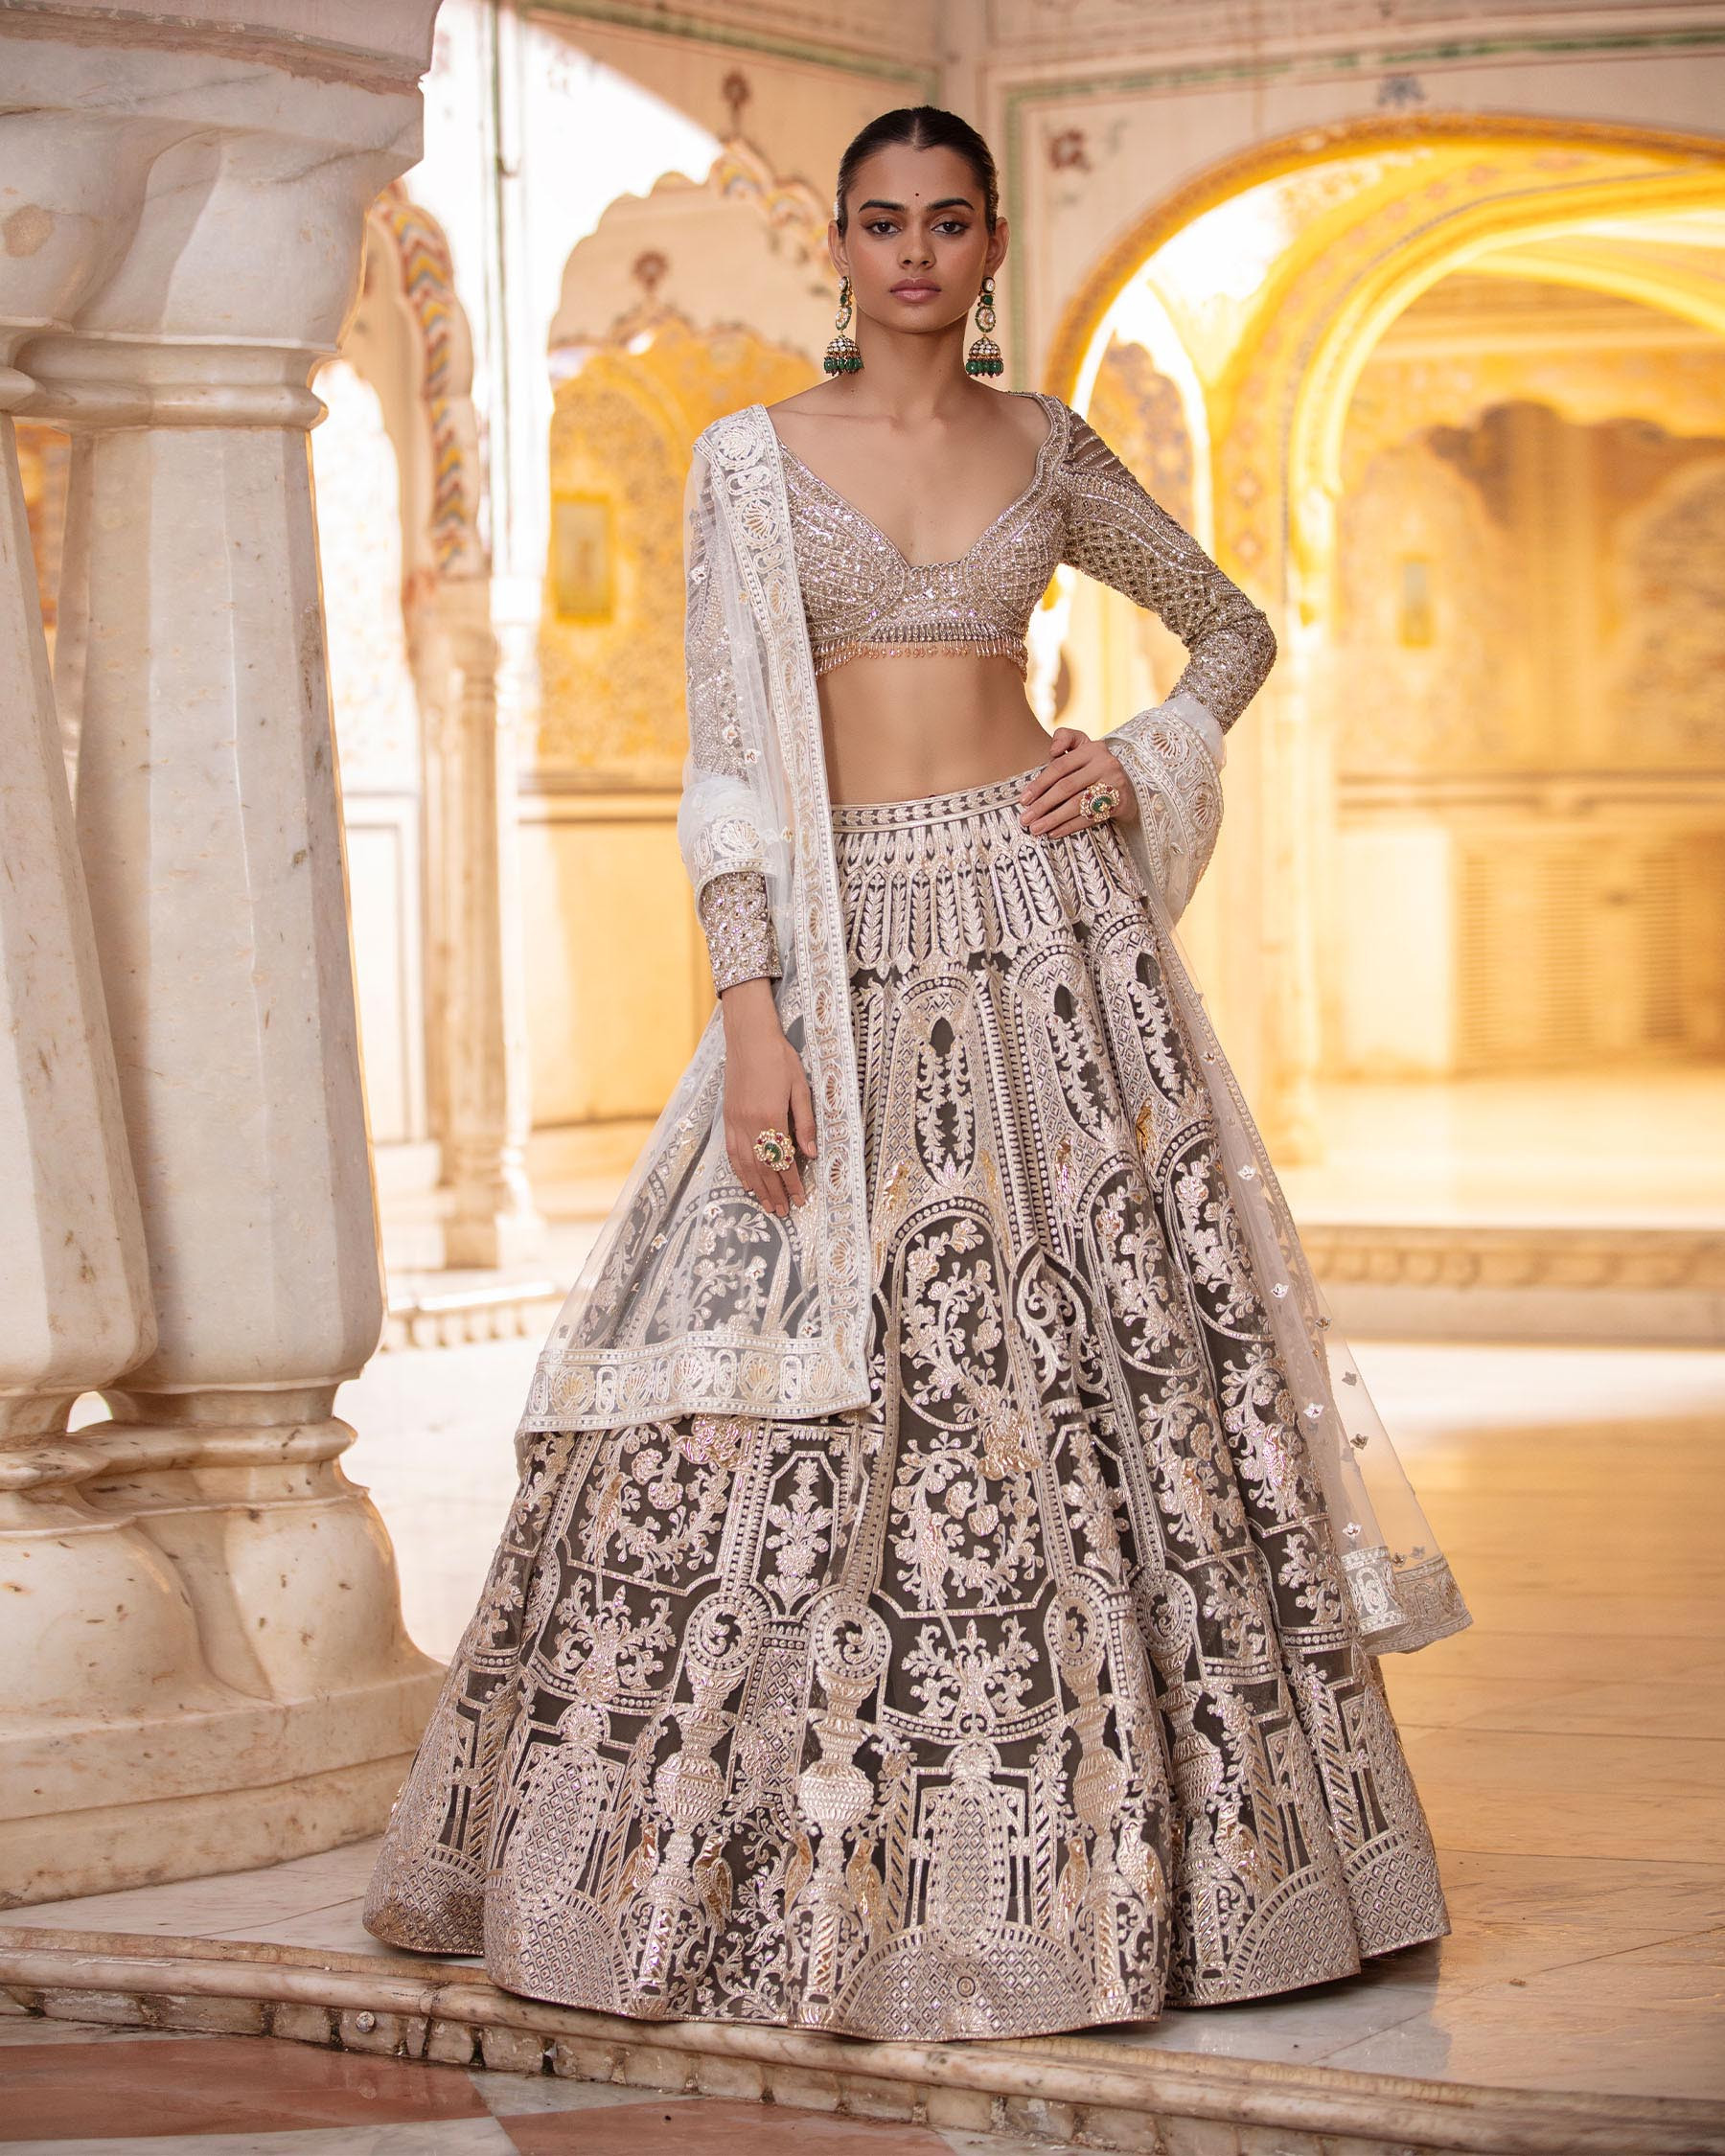 All White Indian Bridal Look In A Modish Payal Keyal Lehenga | Indian  wedding gowns, Indian wedding outfits, Indian bridal dress